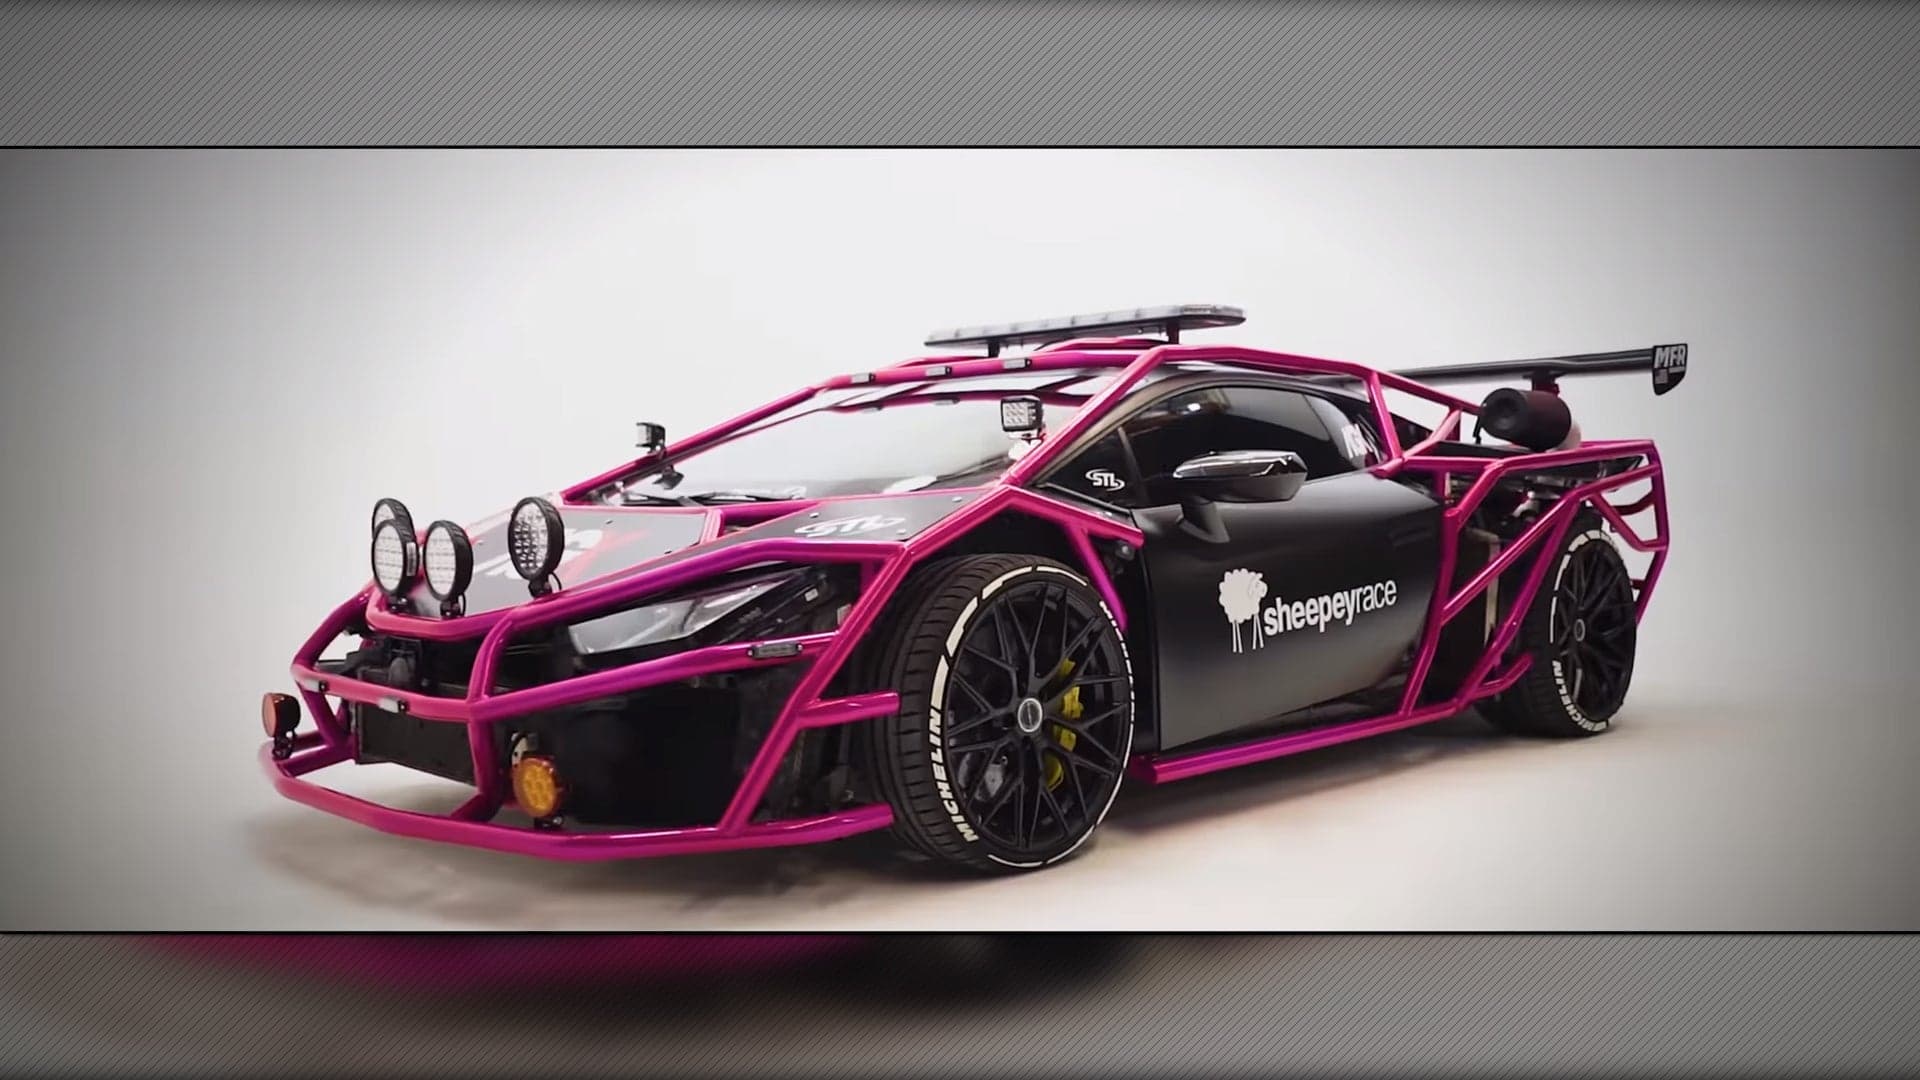 Is This ‘Rally’ Lamborghini Huracan Inspired by Fast and Furious 6 Cool or Revolting?